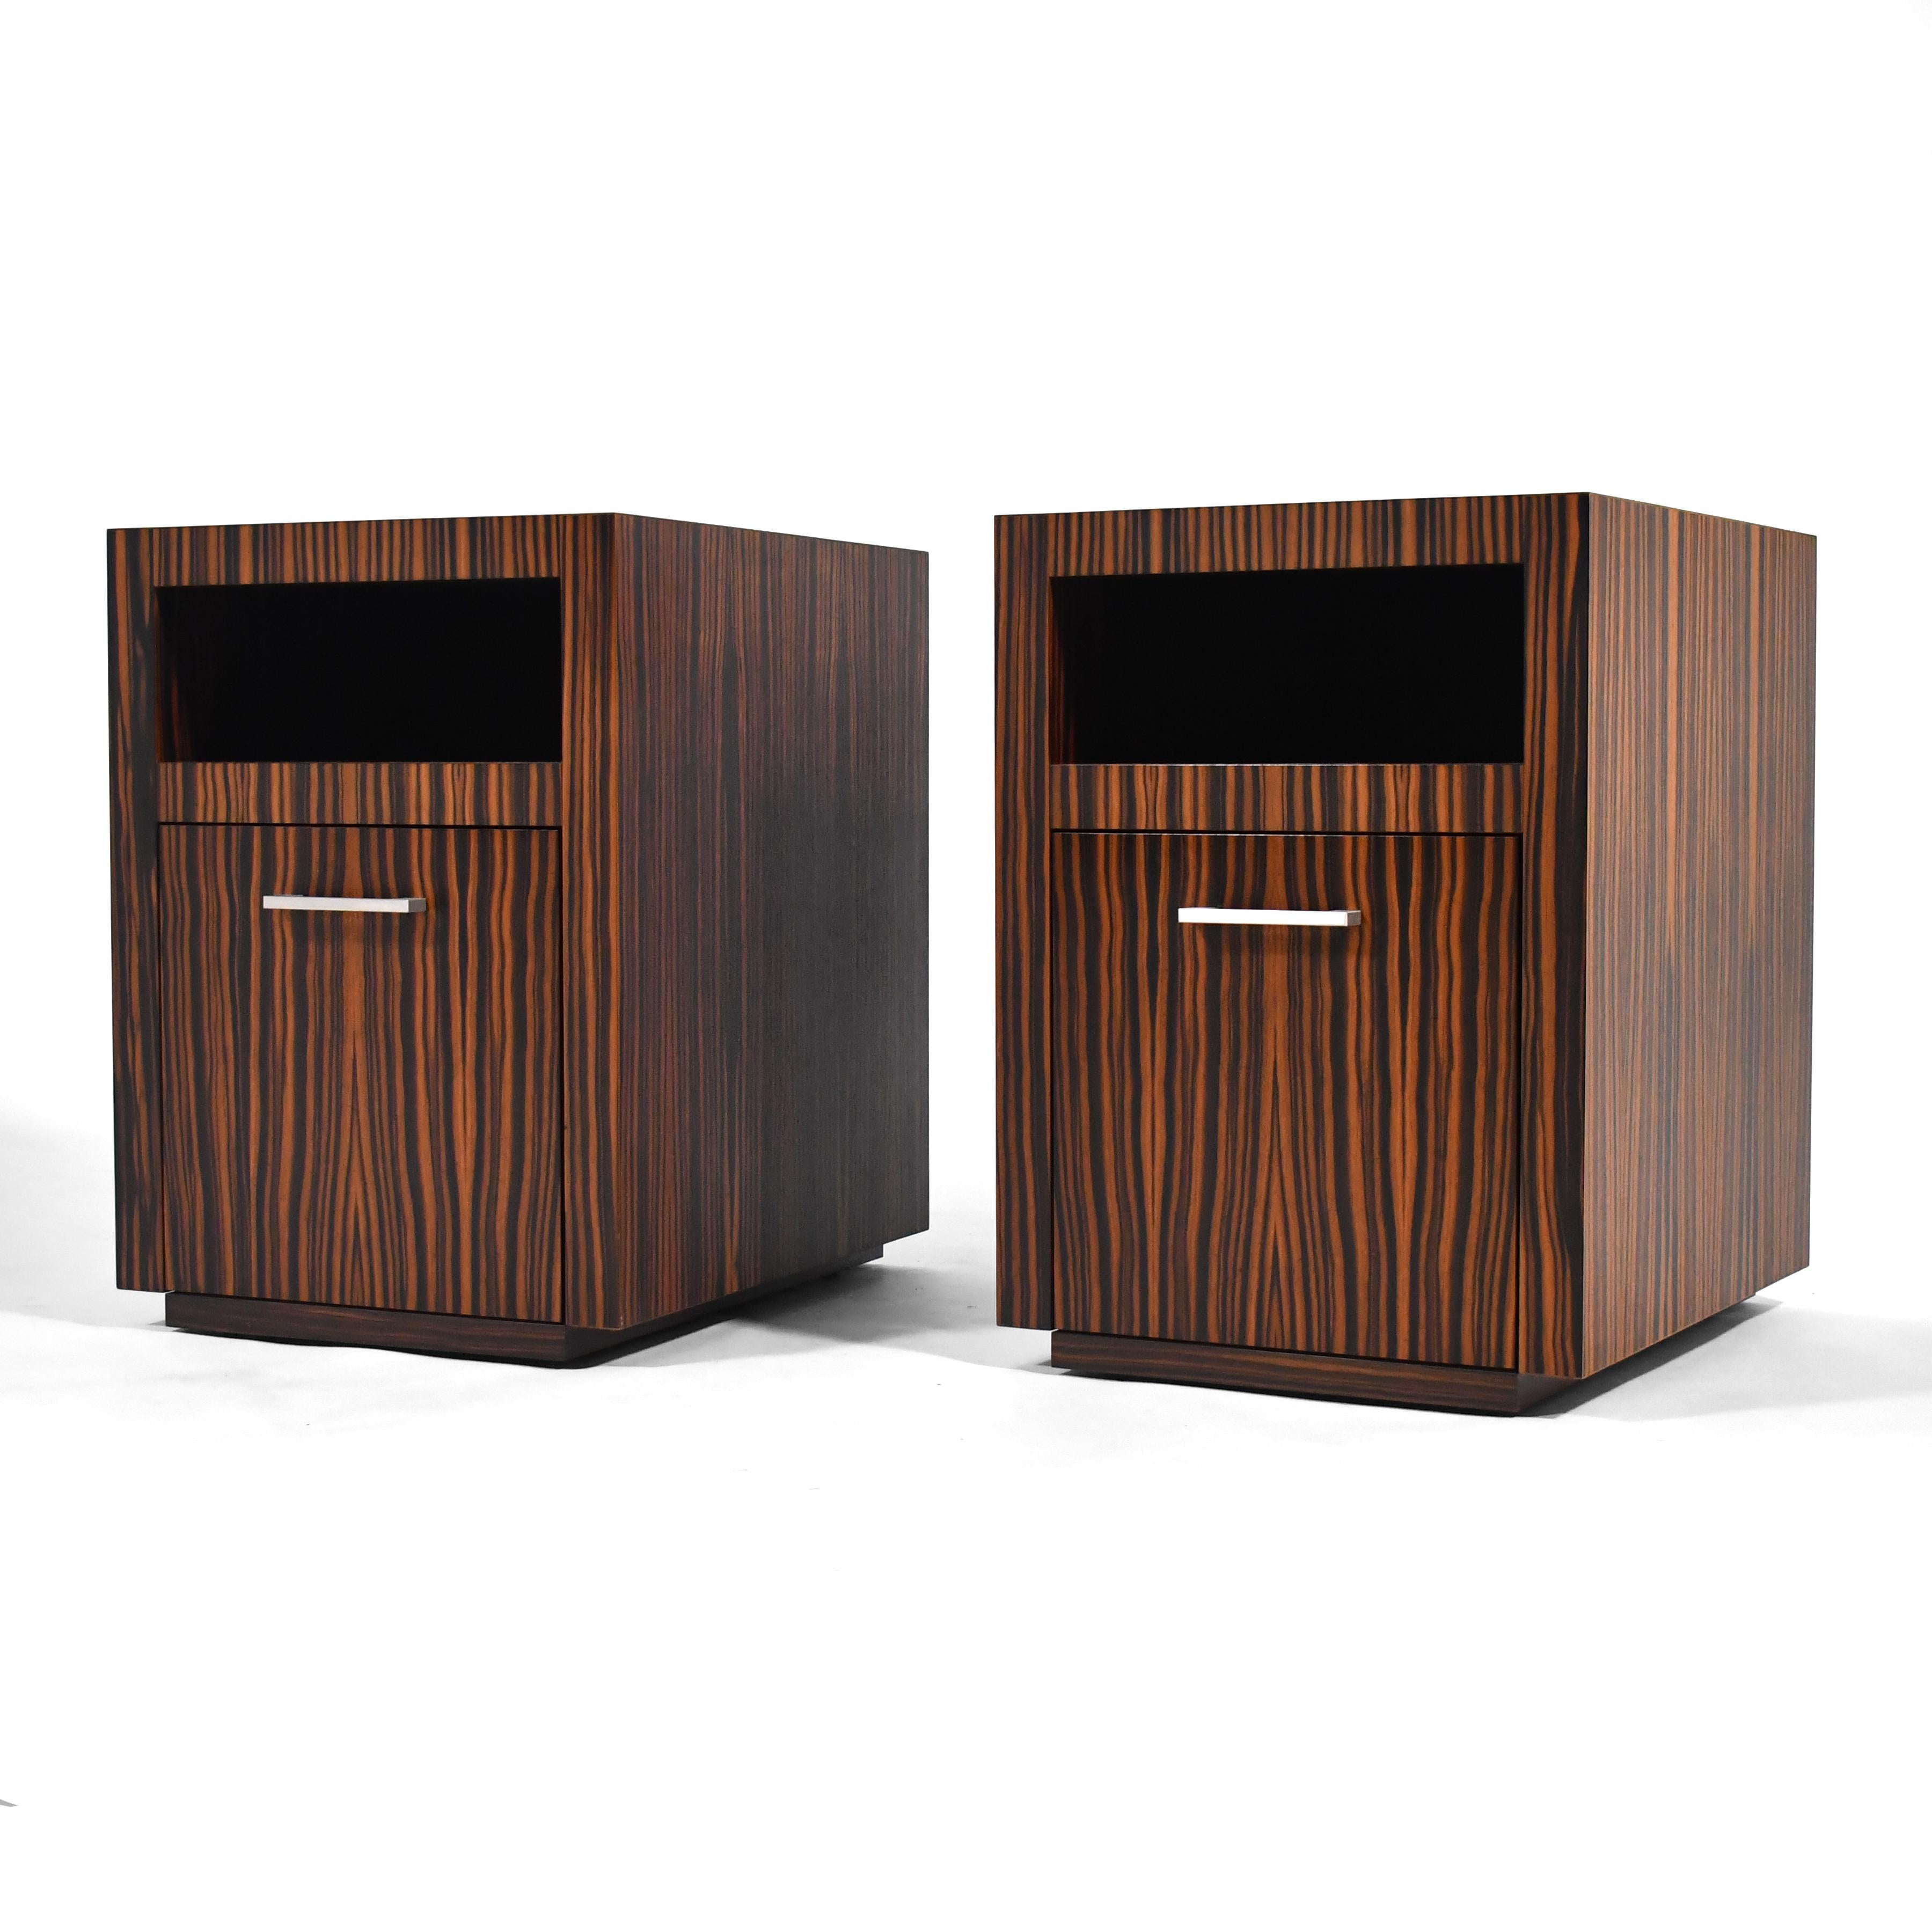 This spectacular pair of nightstands were custom designed by Richard Gorman and made by Manifesto in Chicago. The minimalist form is clad in rich, highly figured zebra wood and feature a storage compartment over a drawer with a sliding tray. They